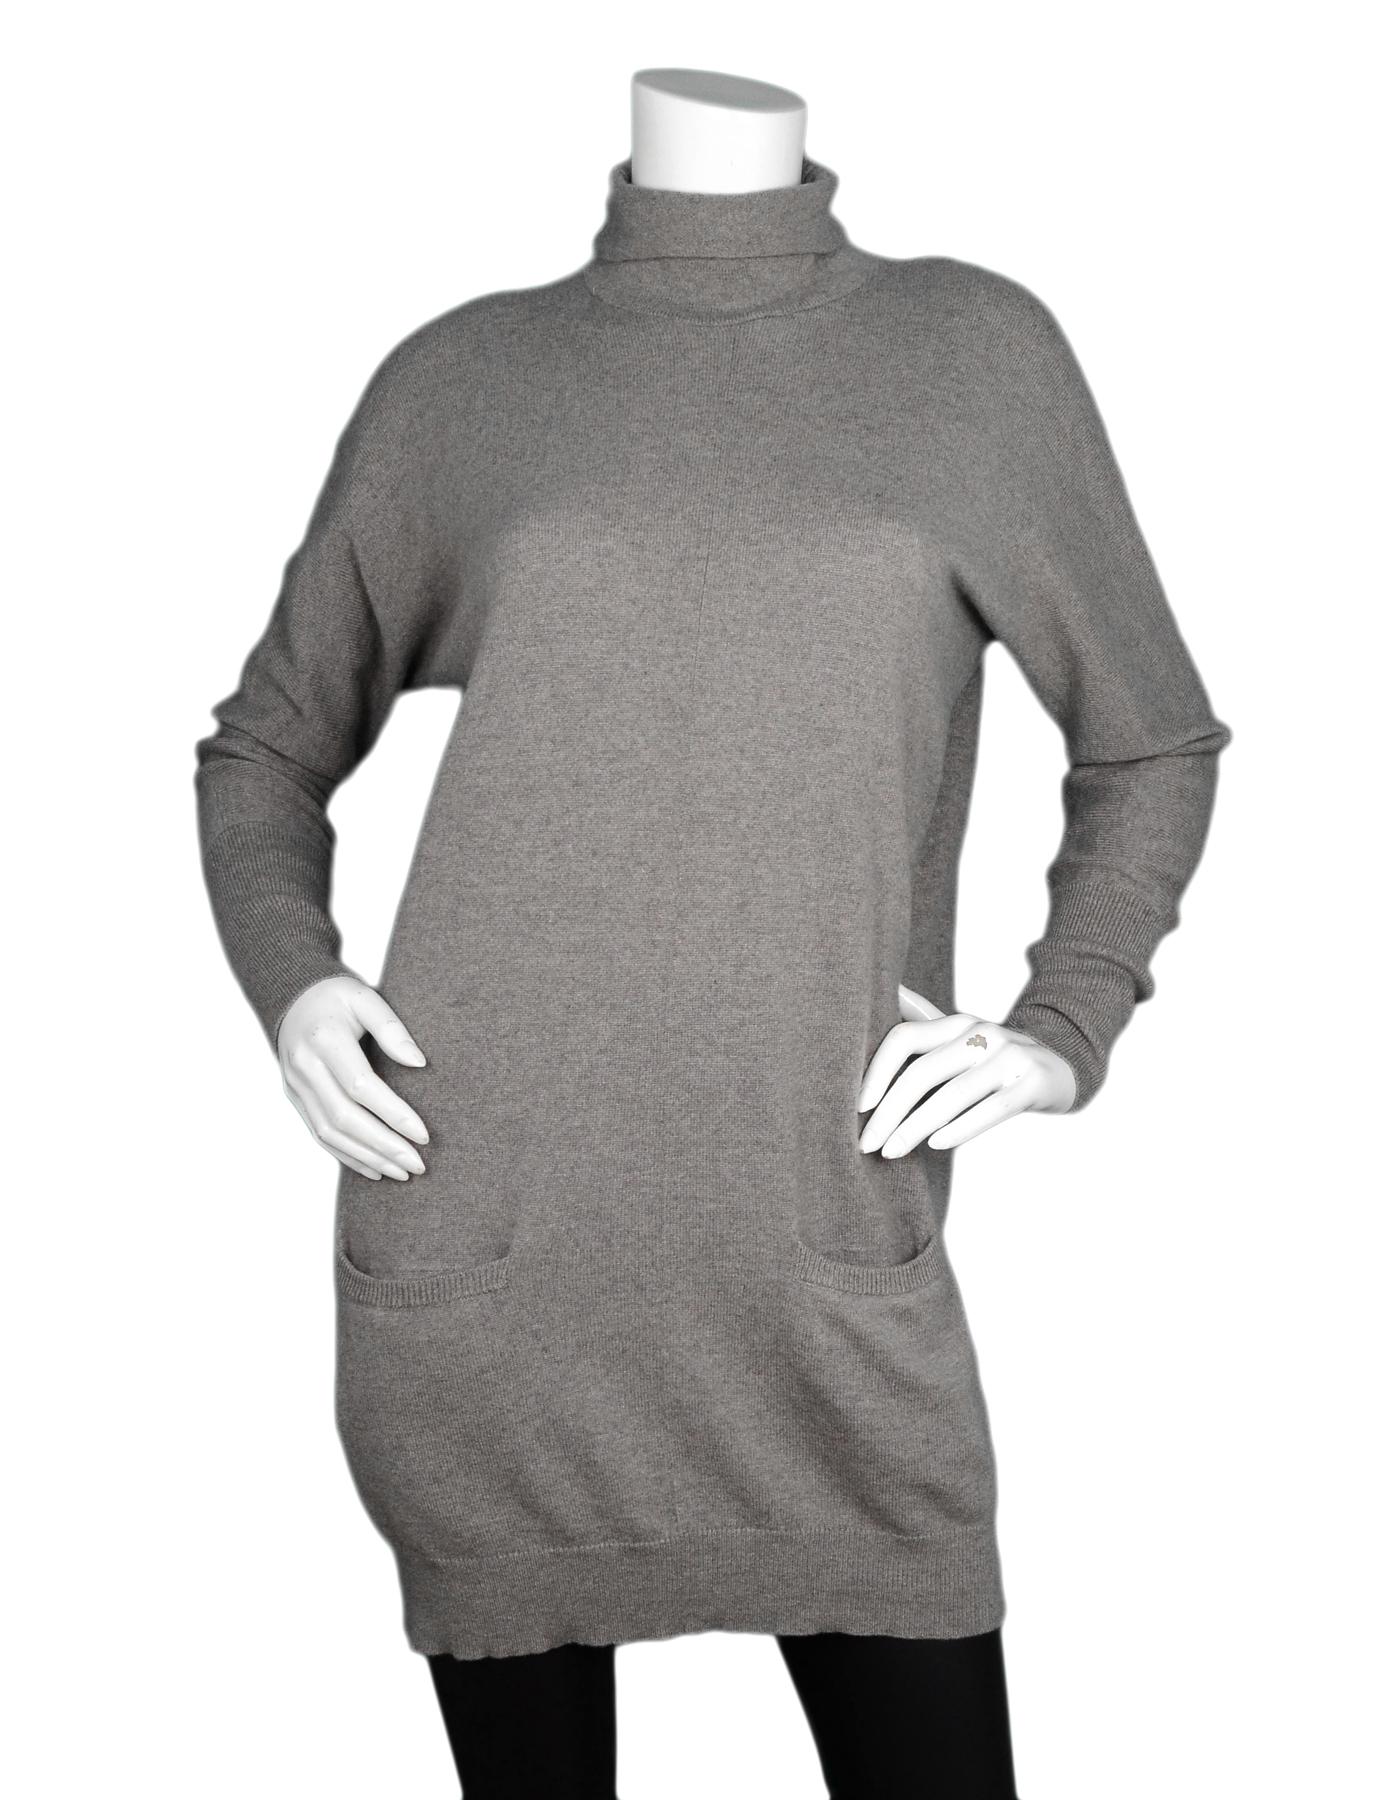 Brunello Cucinelli Grey Cashmere Turtleneck Sweater Dress W/ Pockets Sz S

Made In: Italy
Color: Grey
Materials: 64% mohair, 33% nylon, 3% wool
Opening/Closure: Pull over
Overall Condition: Excellent pre-owned condition 

Measurements: 
Shoulder To